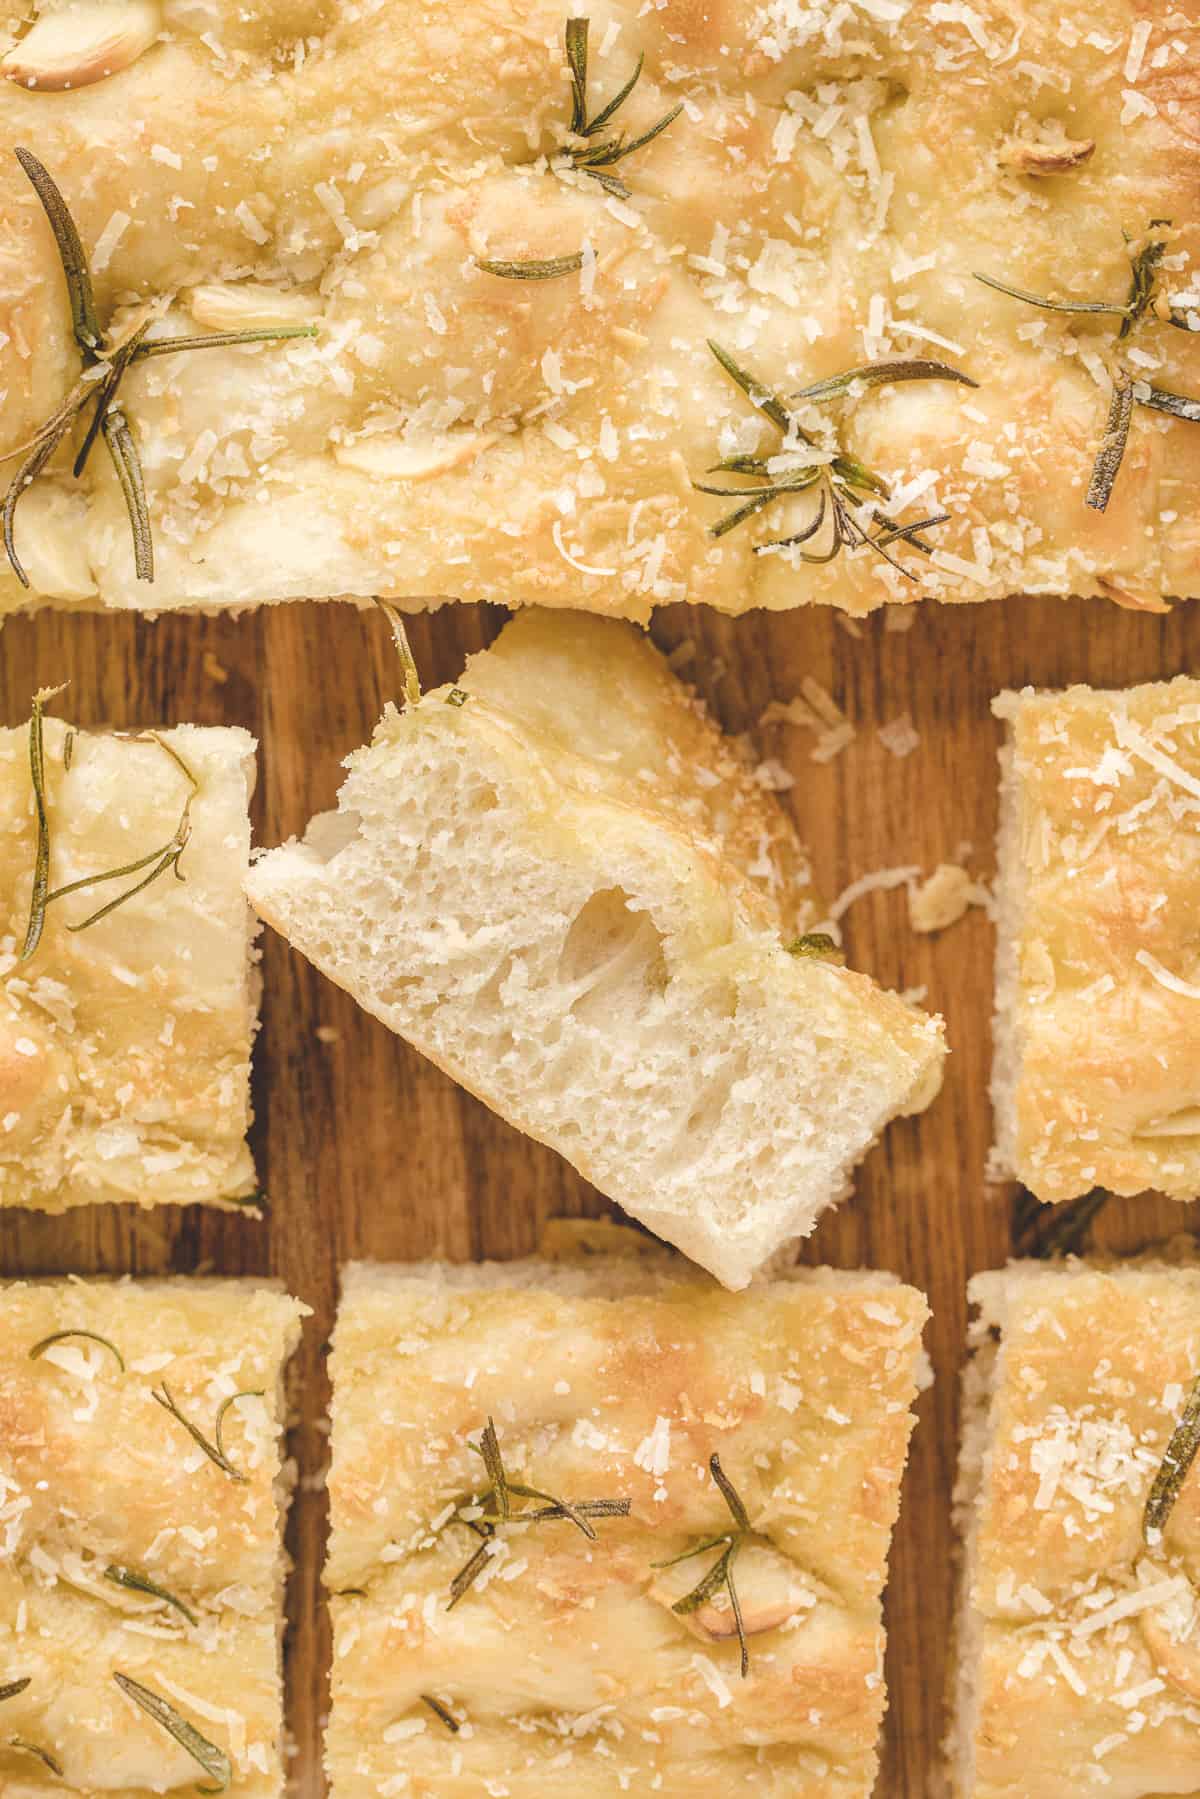 Slices of focaccia are placed on a wooden cutting board.